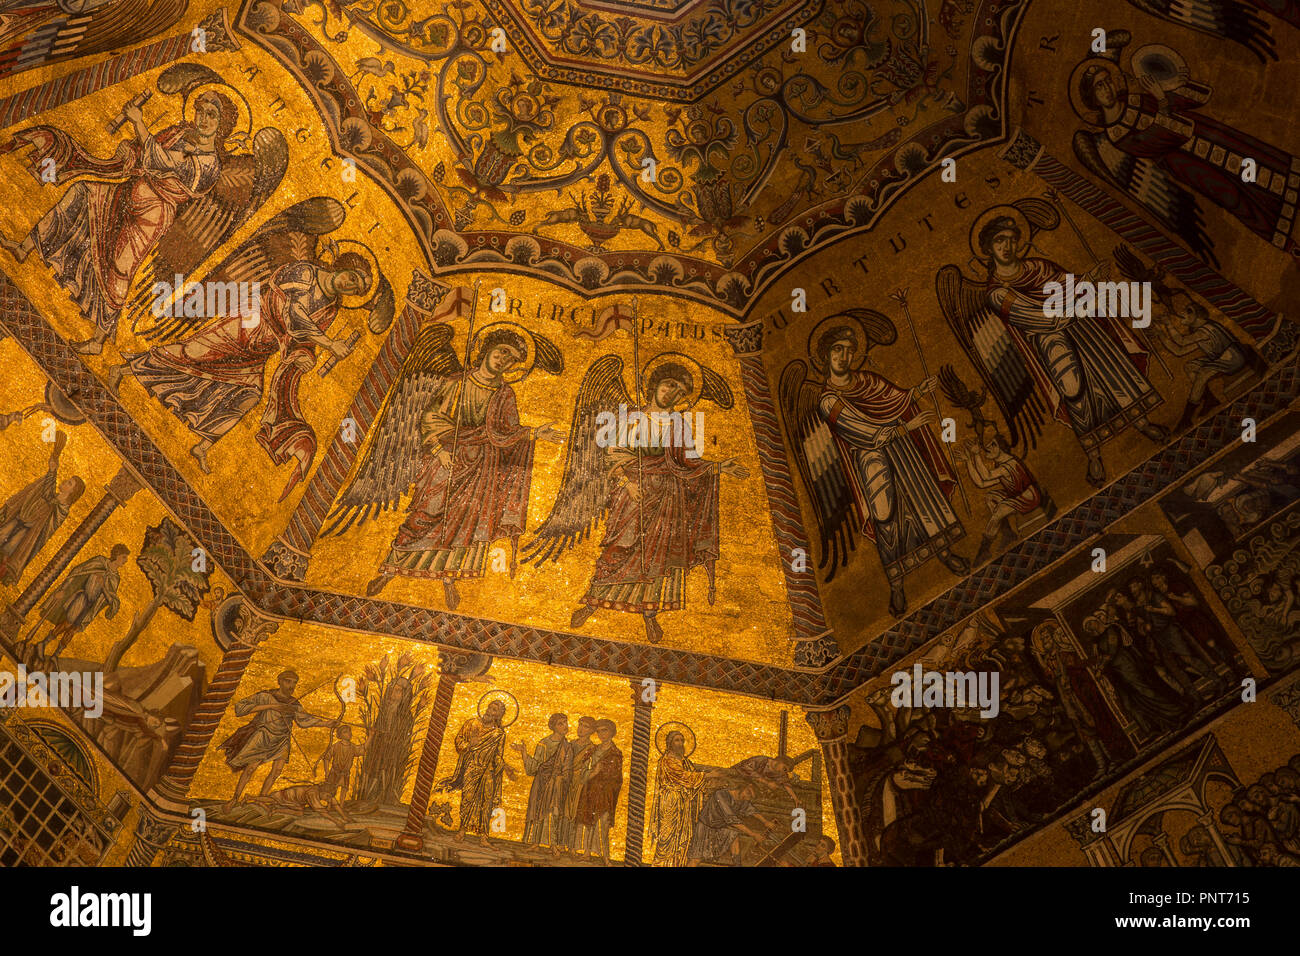 Baptistry ceiling (detail) in Florence, Italy Stock Photo